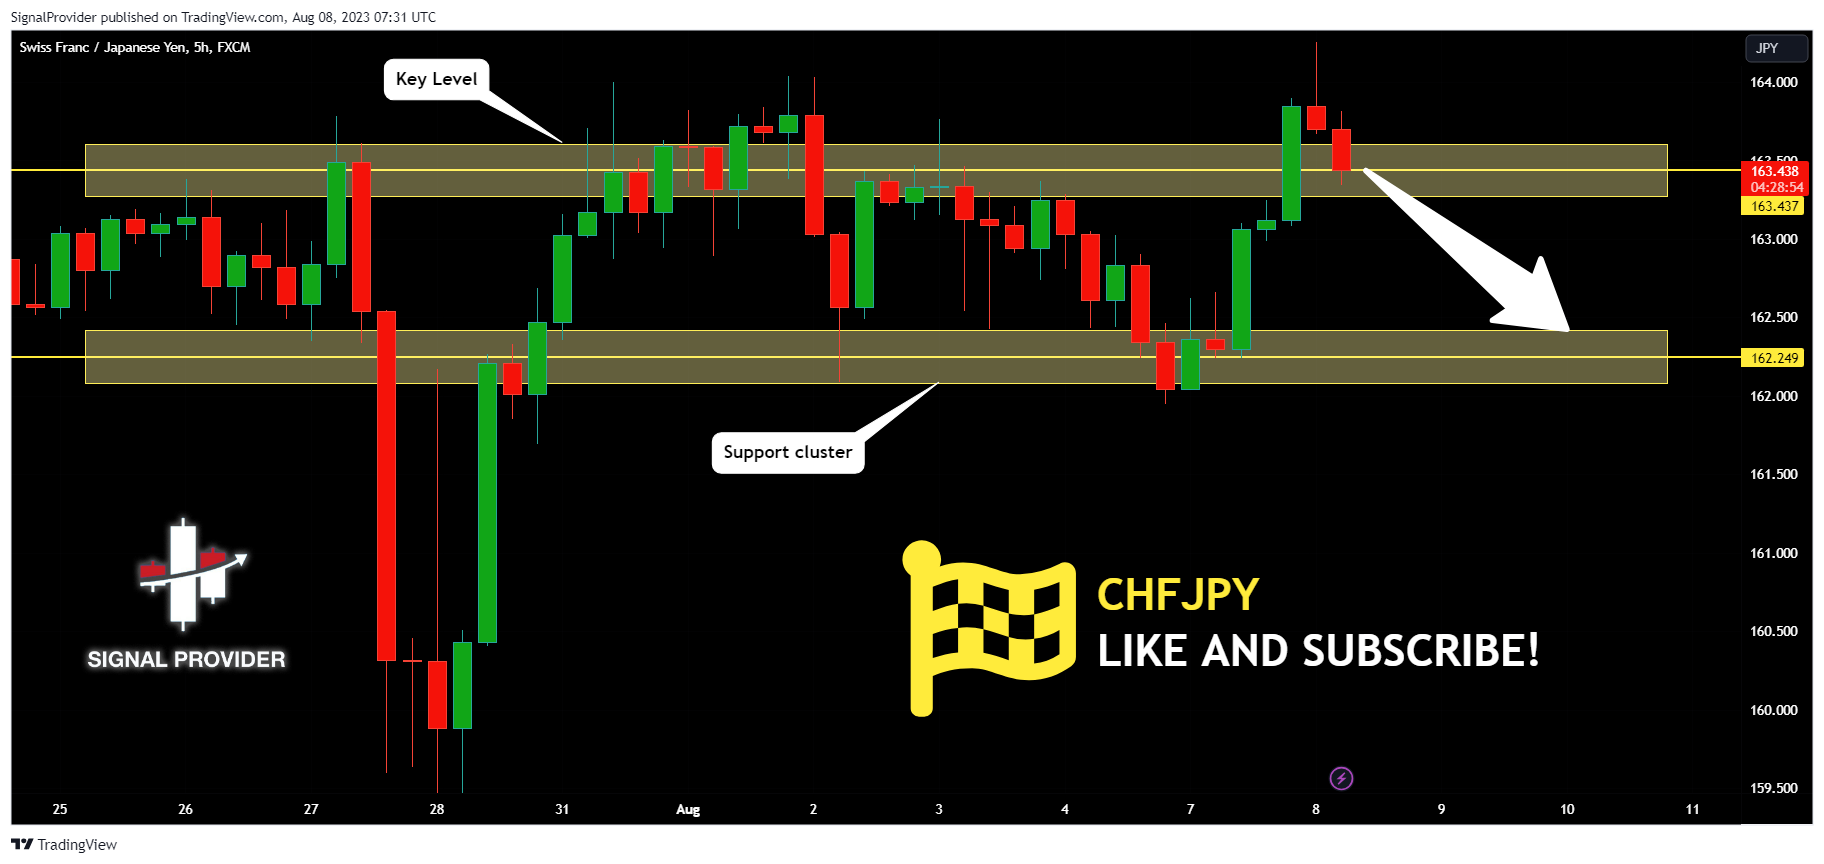 CHFJPY Will Move Lower! Sell!